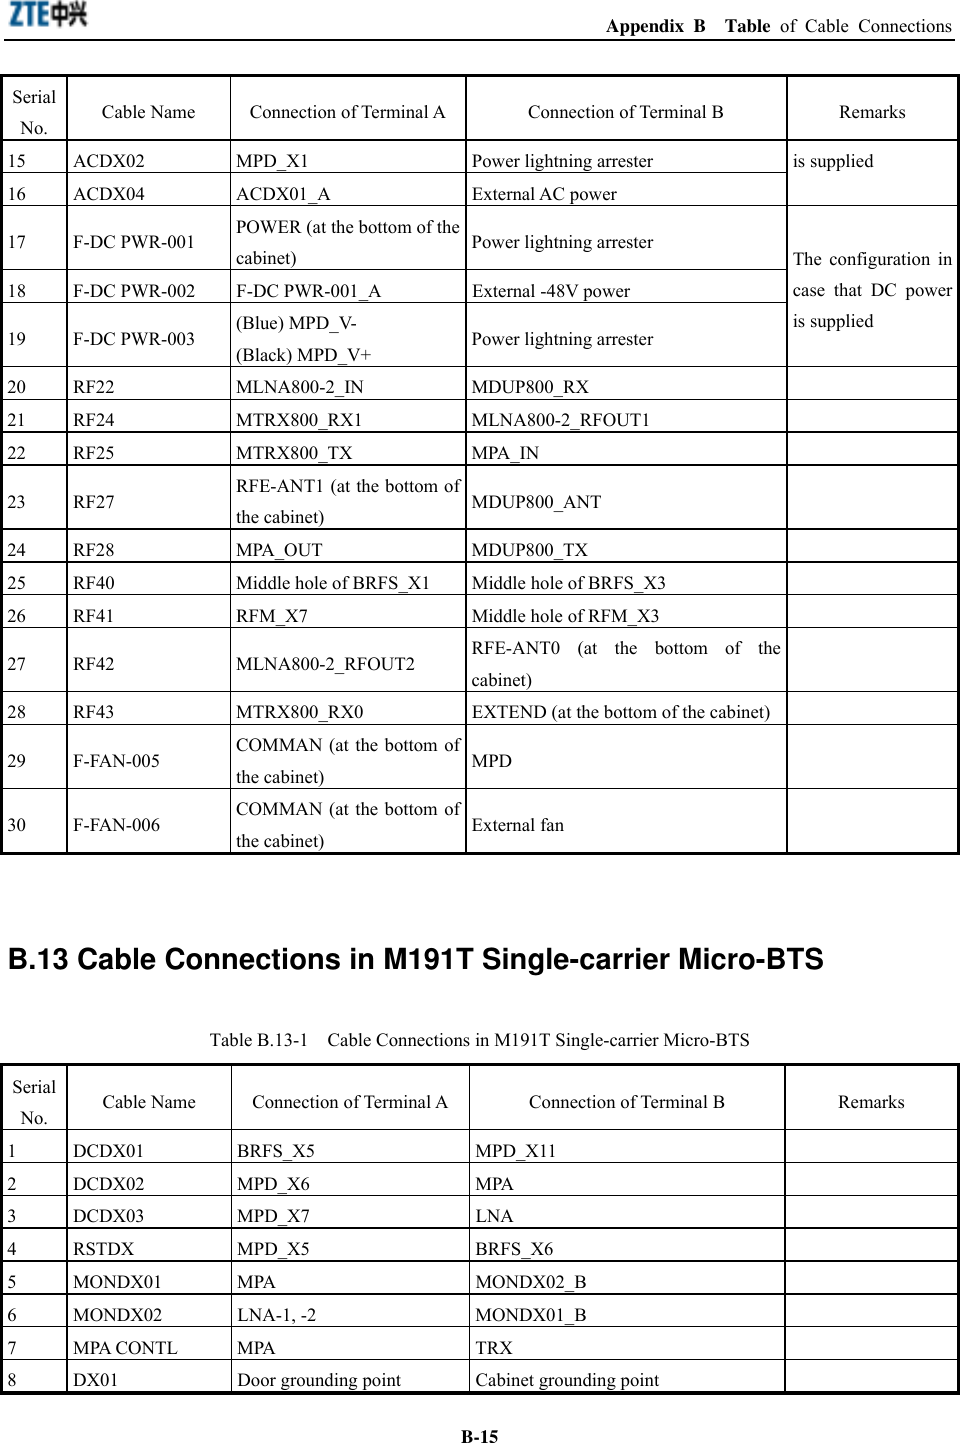  Appendix B  Table of Cable Connections  B-15Serial No.  Cable Name  Connection of Terminal A  Connection of Terminal B  Remarks 15  ACDX02  MPD_X1  Power lightning arrester 16 ACDX04  ACDX01_A  External AC power is supplied 17 F-DC PWR-001 POWER (at the bottom of the cabinet)  Power lightning arrester 18  F-DC PWR-002  F-DC PWR-001_A  External -48V power 19 F-DC PWR-003 (Blue) MPD_V- (Black) MPD_V+  Power lightning arrester The configuration in case that DC power is supplied 20 RF22  MLNA800-2_IN  MDUP800_RX   21 RF24  MTRX800_RX1  MLNA800-2_RFOUT1   22 RF25  MTRX800_TX  MPA_IN   23 RF27  RFE-ANT1 (at the bottom of the cabinet)  MDUP800_ANT  24 RF28  MPA_OUT  MDUP800_TX   25  RF40  Middle hole of BRFS_X1  Middle hole of BRFS_X3   26  RF41  RFM_X7  Middle hole of RFM_X3   27 RF42  MLNA800-2_RFOUT2  RFE-ANT0 (at the bottom of the cabinet)   28  RF43  MTRX800_RX0  EXTEND (at the bottom of the cabinet)   29 F-FAN-005  COMMAN (at the bottom of the cabinet)  MPD  30 F-FAN-006  COMMAN (at the bottom of the cabinet)  External fan    B.13 Cable Connections in M191T Single-carrier Micro-BTS Table B.13-1    Cable Connections in M191T Single-carrier Micro-BTS Serial No.  Cable Name  Connection of Terminal A  Connection of Terminal B  Remarks 1 DCDX01  BRFS_X5  MPD_X11   2 DCDX02  MPD_X6  MPA   3 DCDX03  MPD_X7  LNA   4 RSTDX  MPD_X5  BRFS_X6   5 MONDX01  MPA  MONDX02_B   6 MONDX02  LNA-1, -2  MONDX01_B   7 MPA CONTL  MPA  TRX   8  DX01  Door grounding point  Cabinet grounding point   